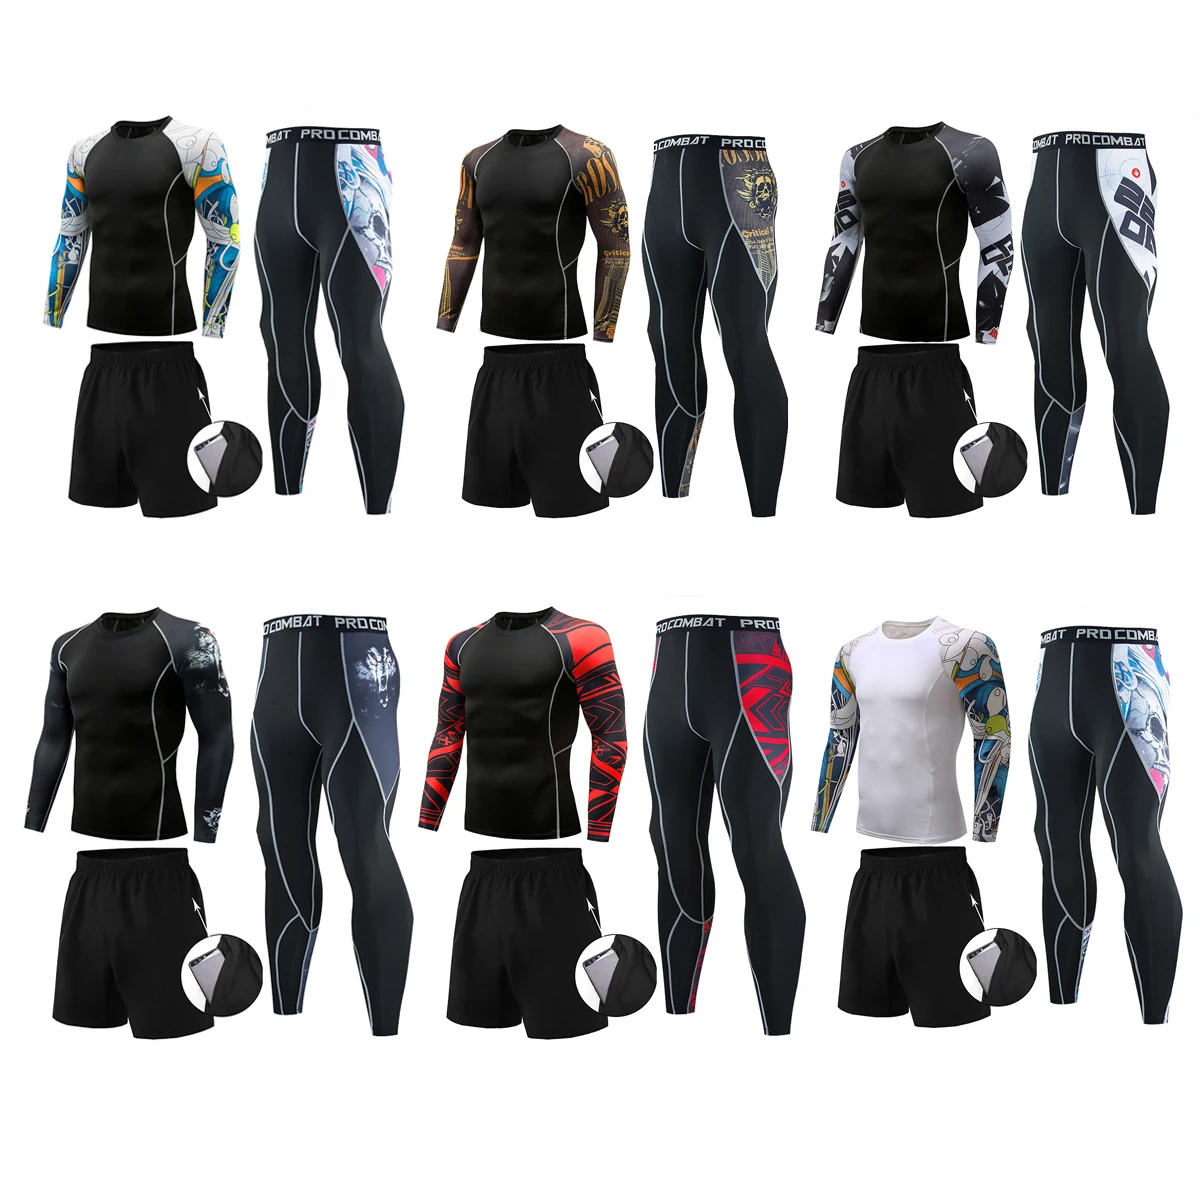 

3 Pcs/Set Men's Tracksuit Gym Fitness Compression Sports Under Suit Clothes Running Jogging Wear Exercise Workout Tights Armour